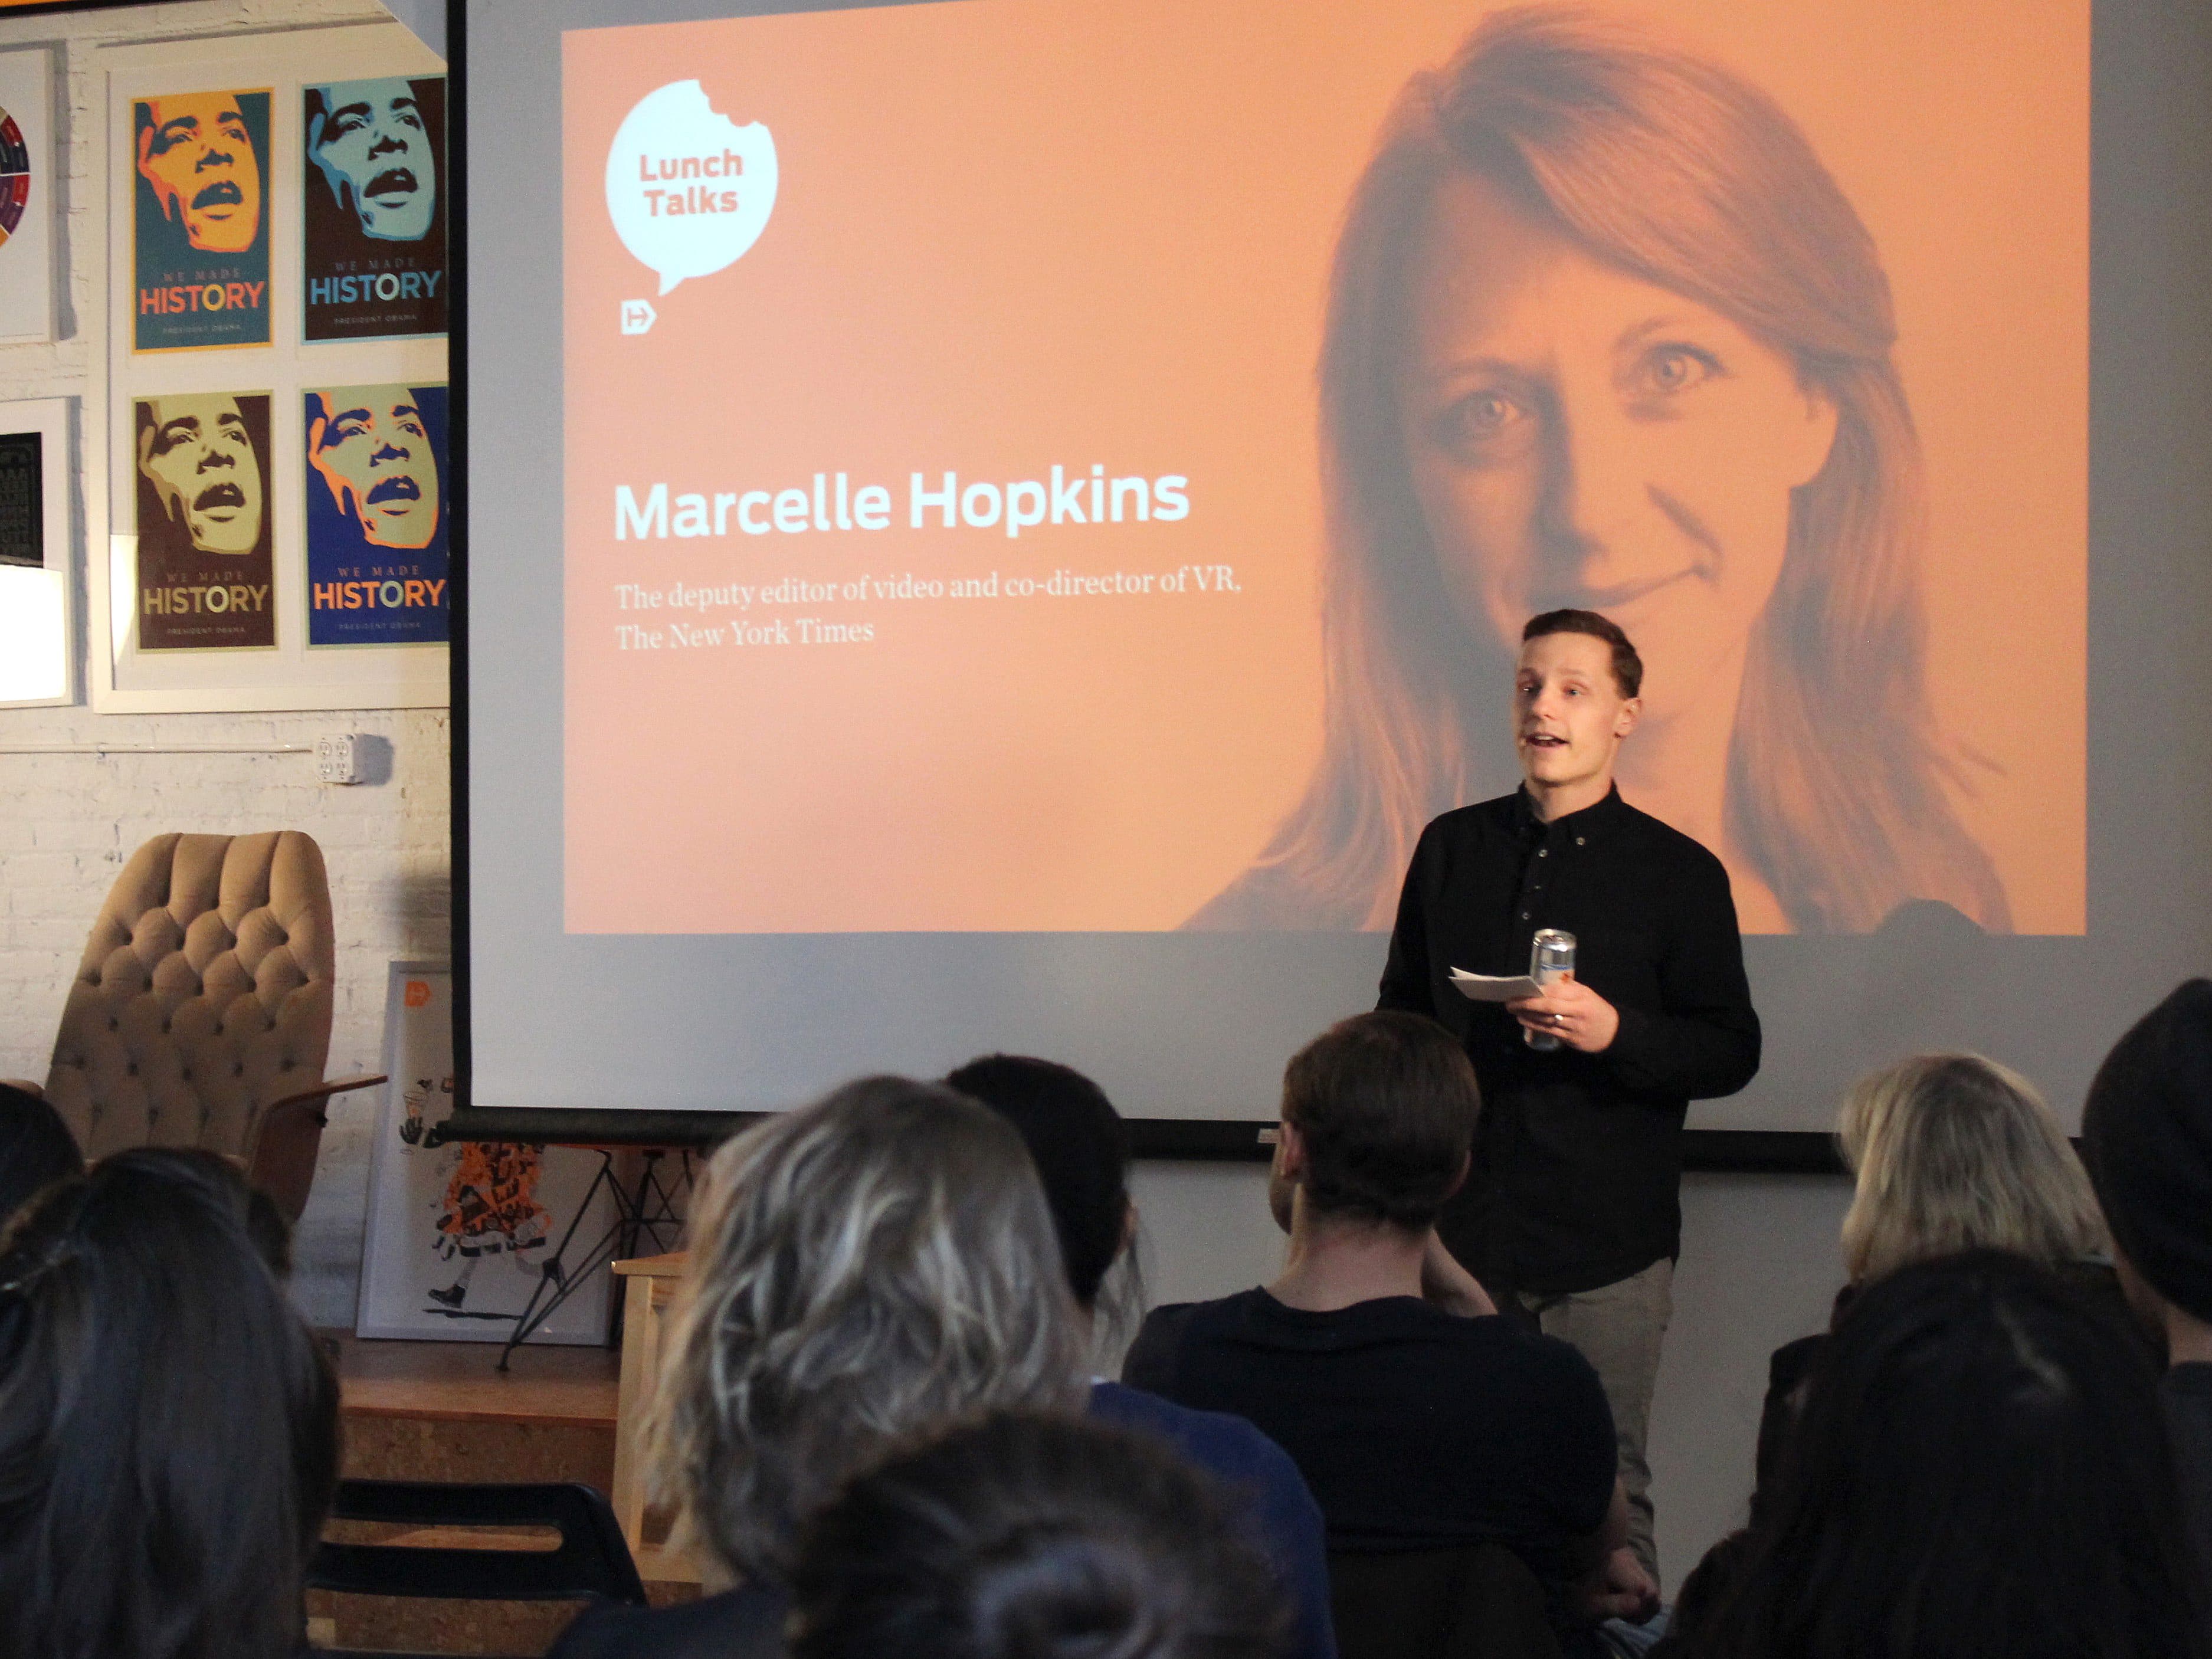 A person stands in front of an audience, holding a glass and speaking, with a presentation slide projected behind them. The slide features a person's photo with the name "Marcelle Hopkins," and their title as "The deputy editor of video and co-director of VR, The New York Times.